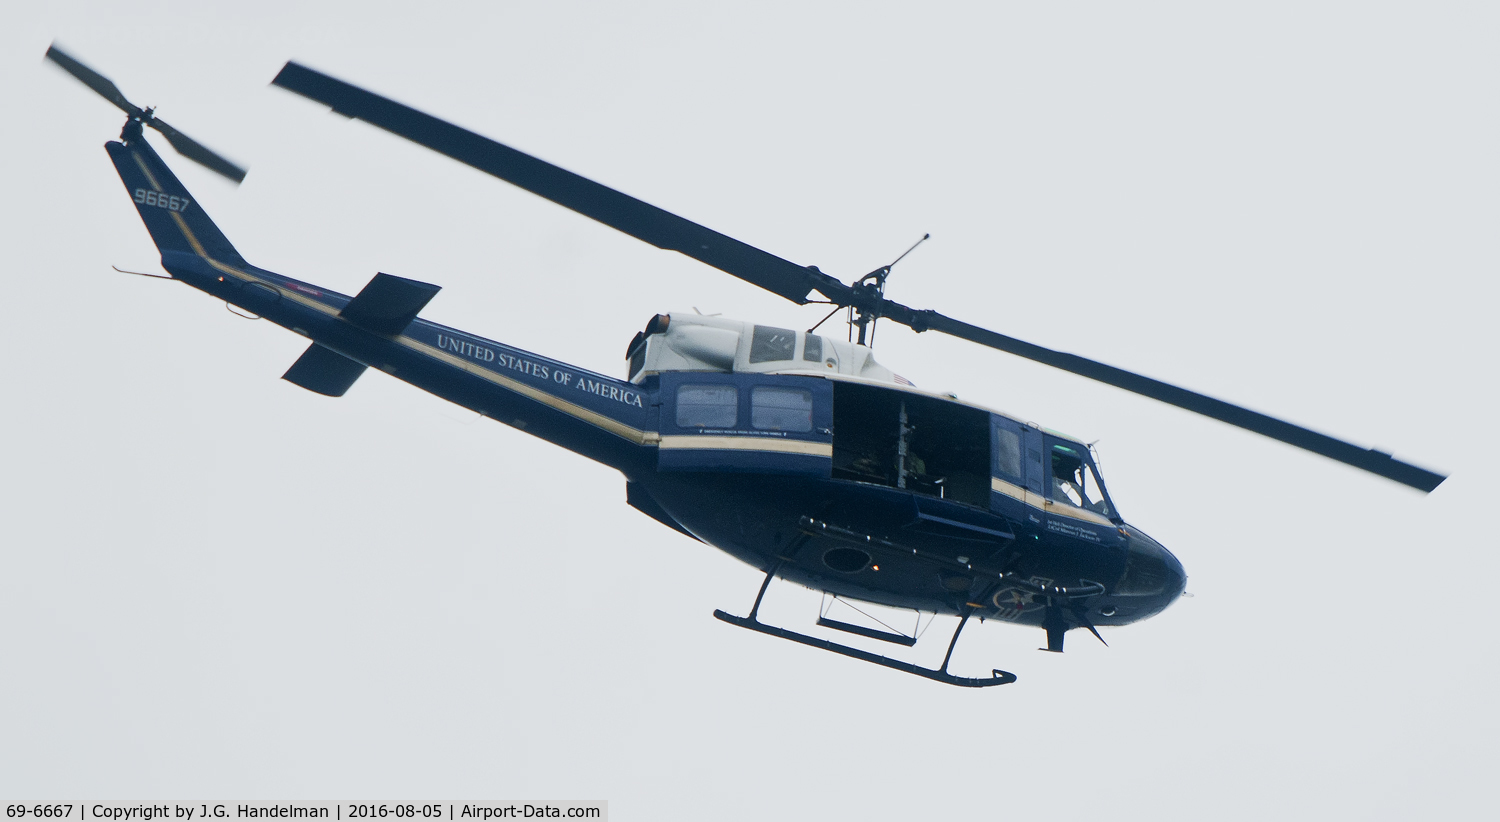 69-6667, 1969 Bell UH-1N Iroquois C/N 31073, Over U.S. Naval Academy Annapolis MD.